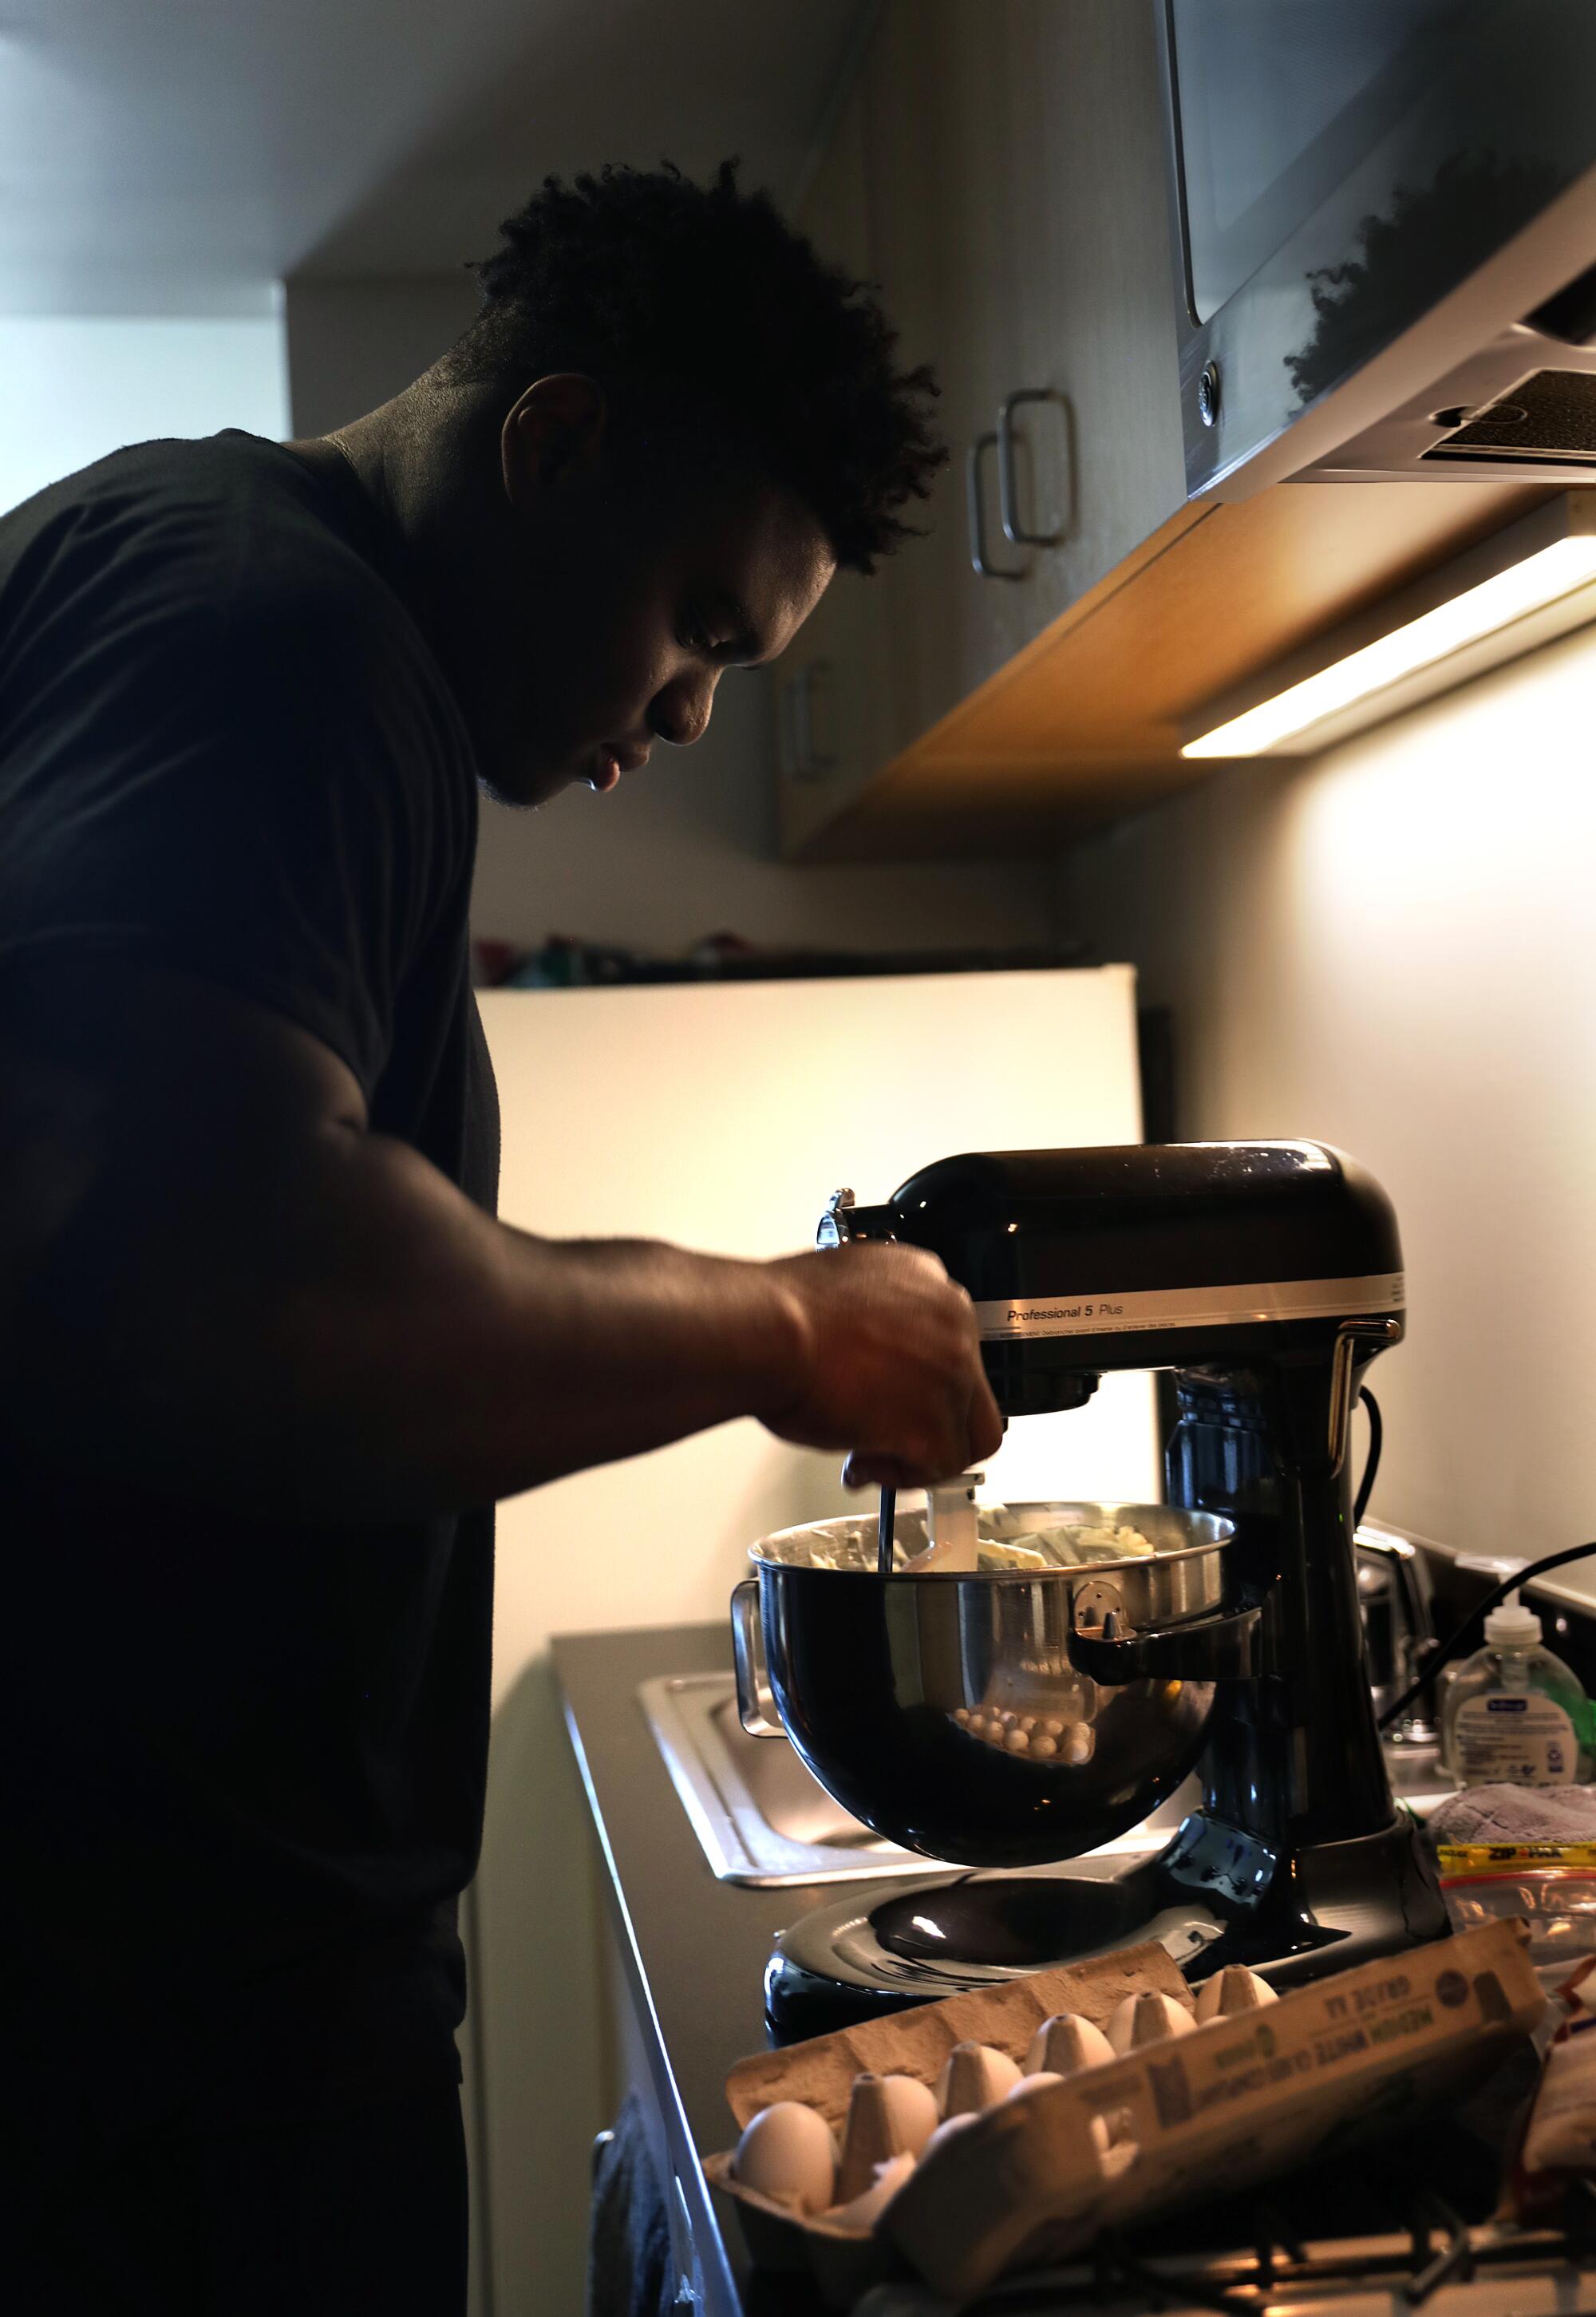 UCLA defensive lineman Otito Ogbonnia uses a stand mixer while makes a strawberry cheesecake  